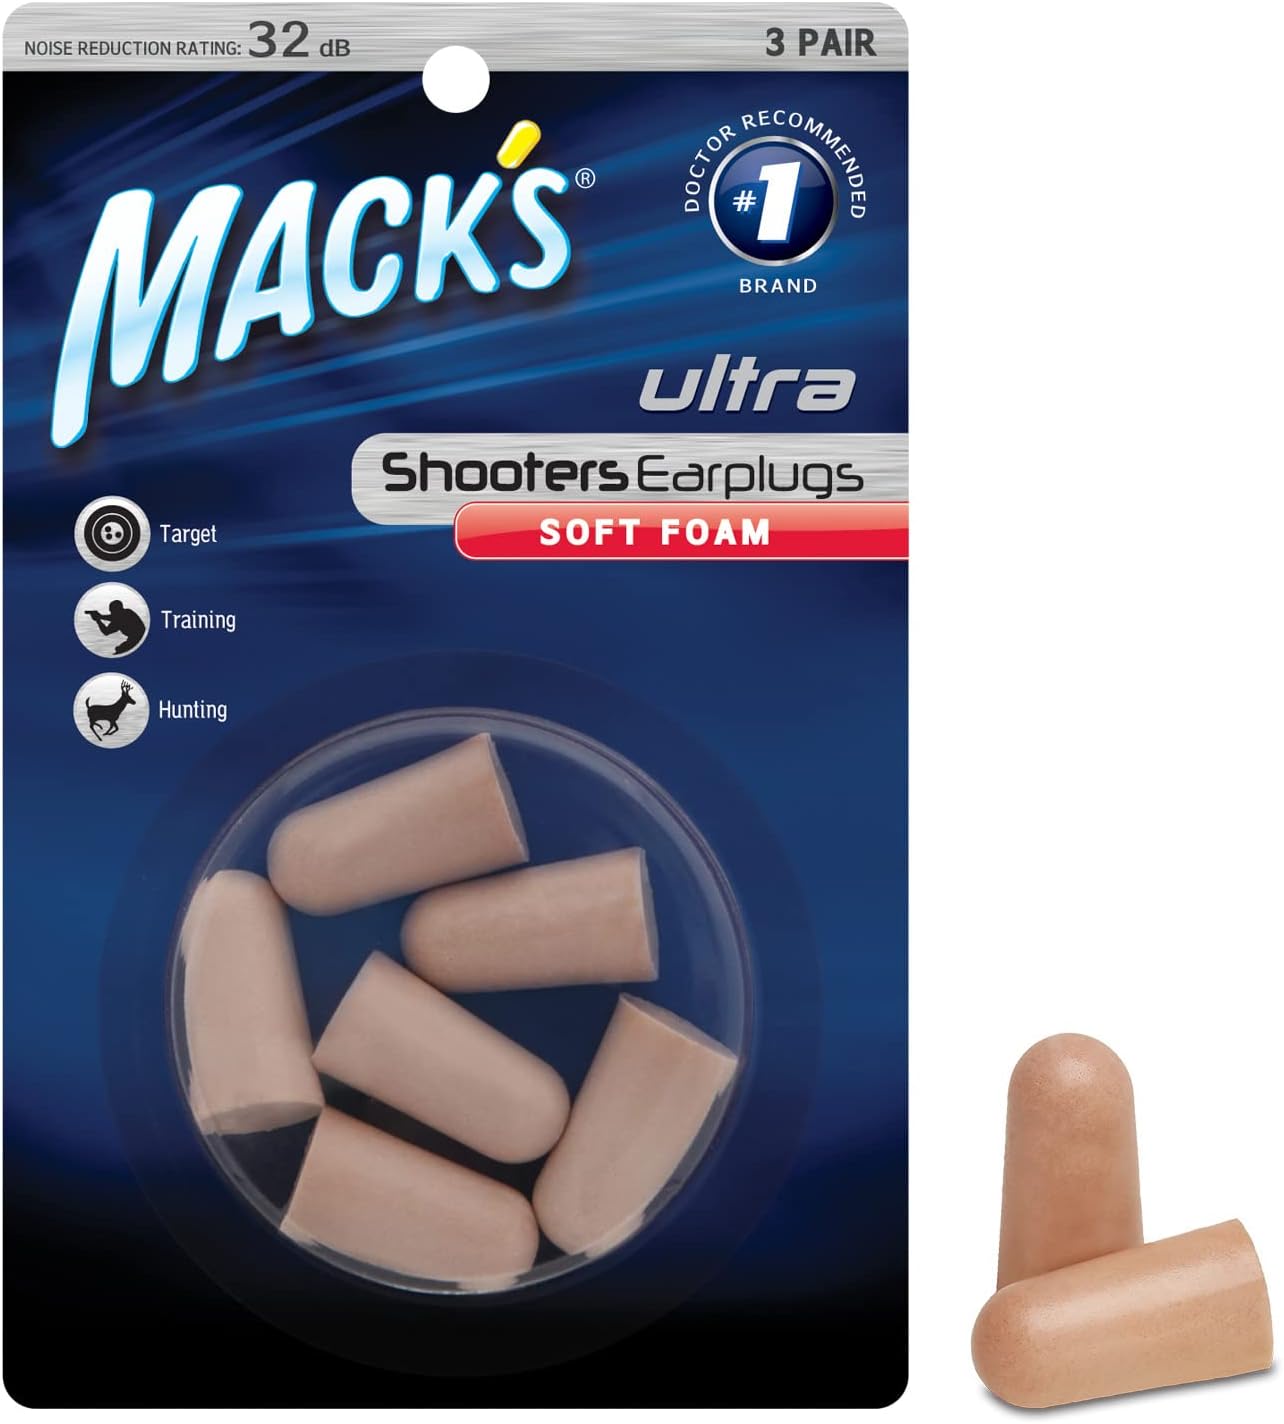 Mack's Ultra Soft Foam Shooting Earplugs, 3 Pair - 32 dB High NRR, Comfortable Ear Plugs for Hunting, Tactical, Target, Skeet and Trap Shooting